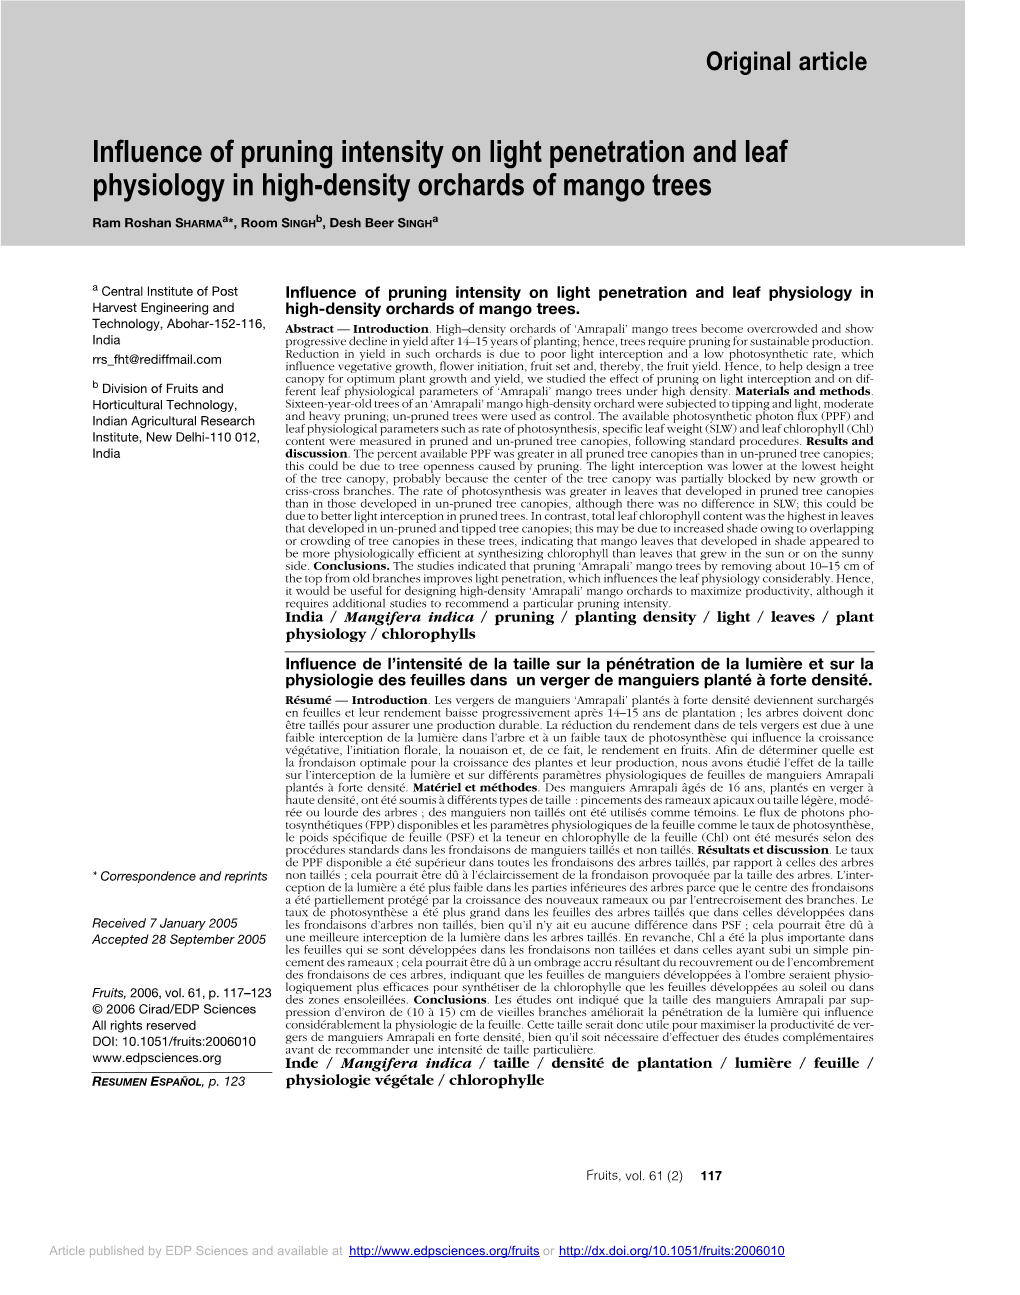 Influence of Pruning Intensity on Light Penetration and Leaf Physiology in High-Density Orchards of Mango Trees